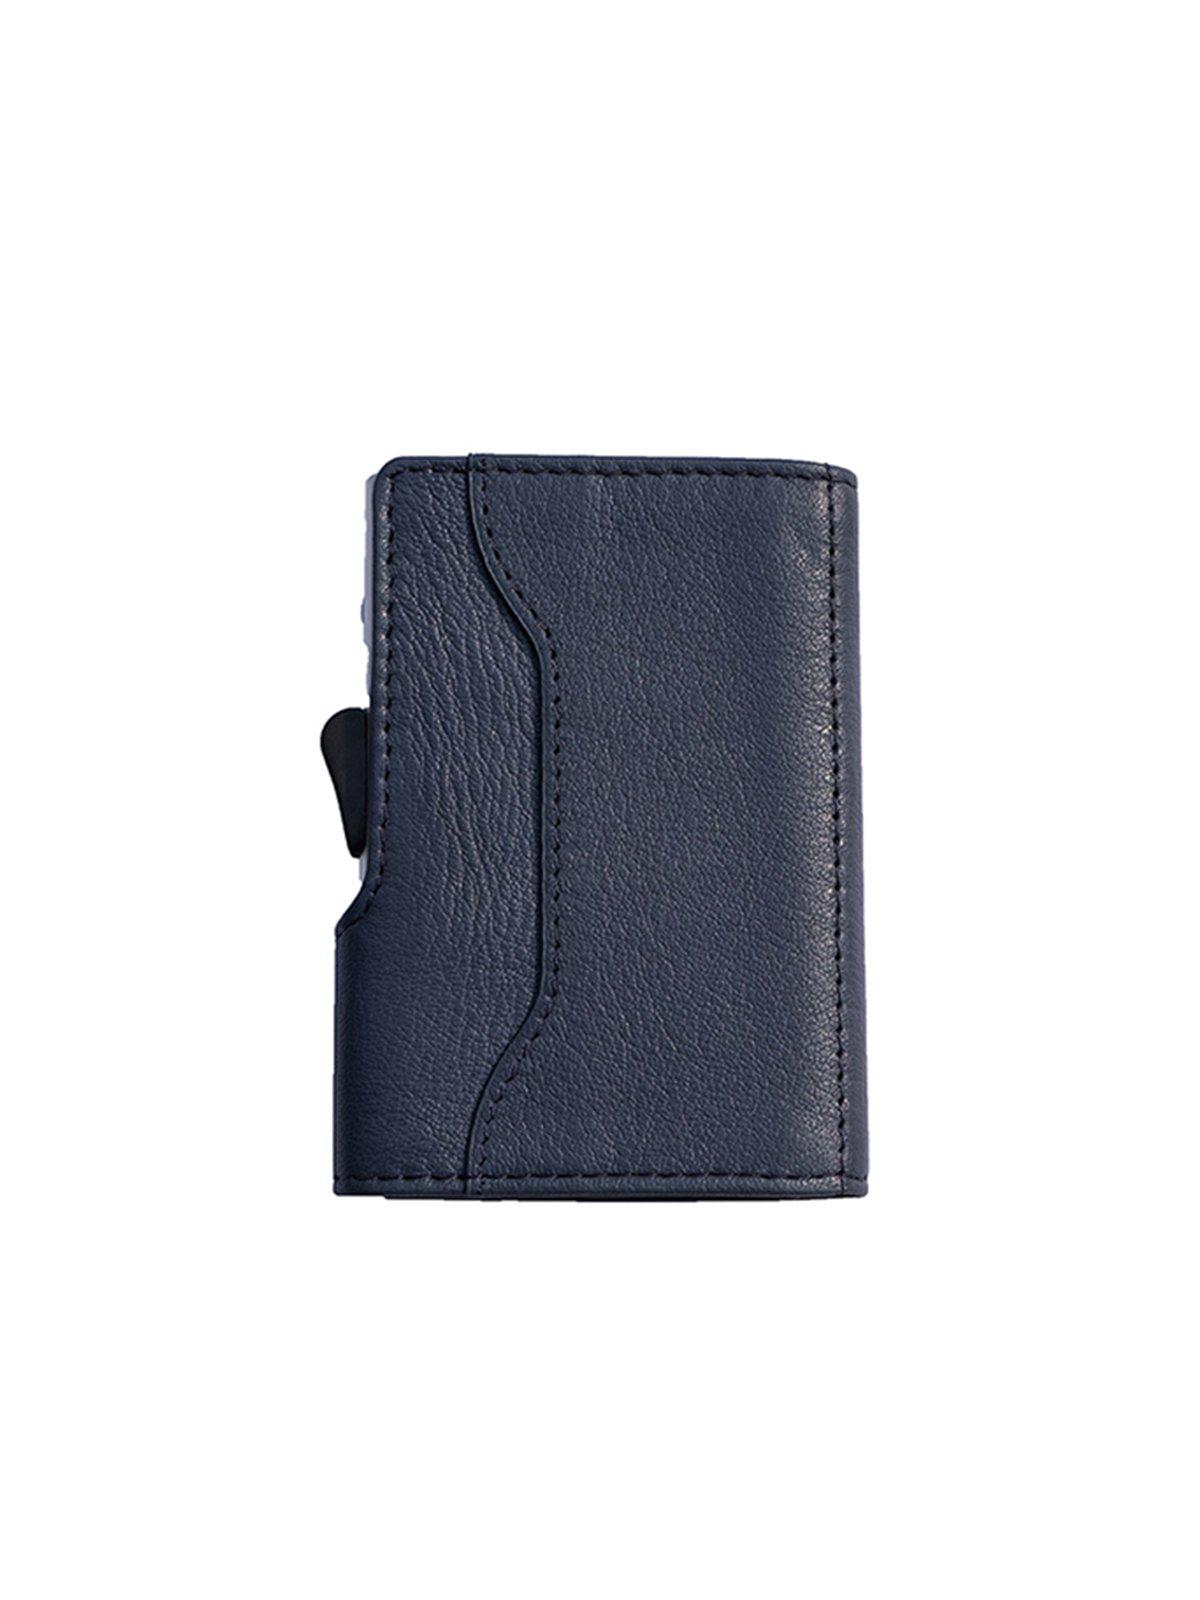 C-Secure Italian Leather RFID Wallet Blu Marino - MORE by Morello Indonesia